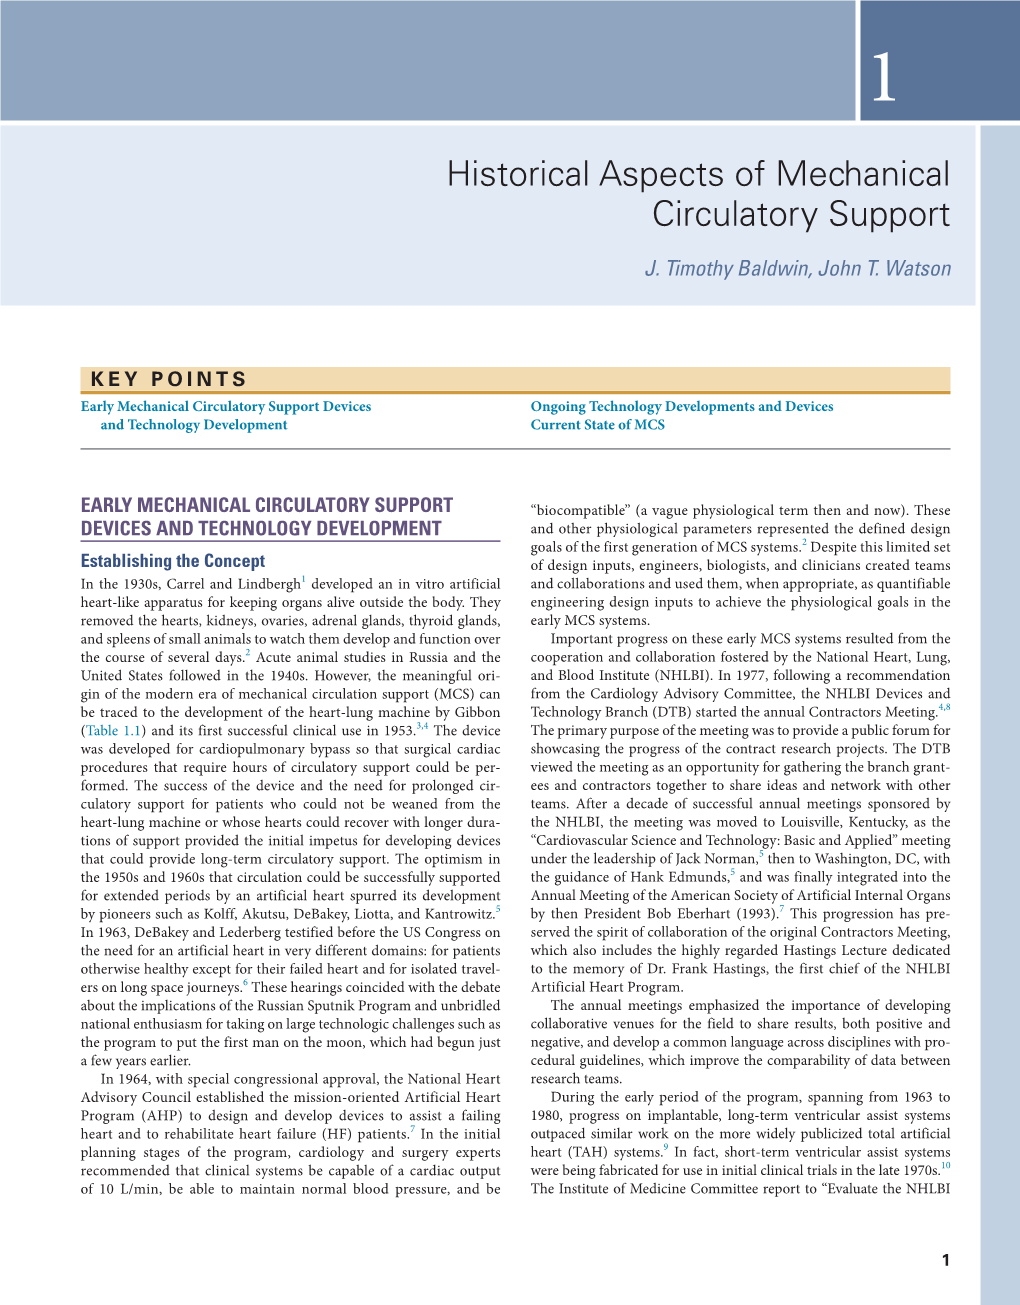 Historical Aspects of Mechanical Circulatory Support